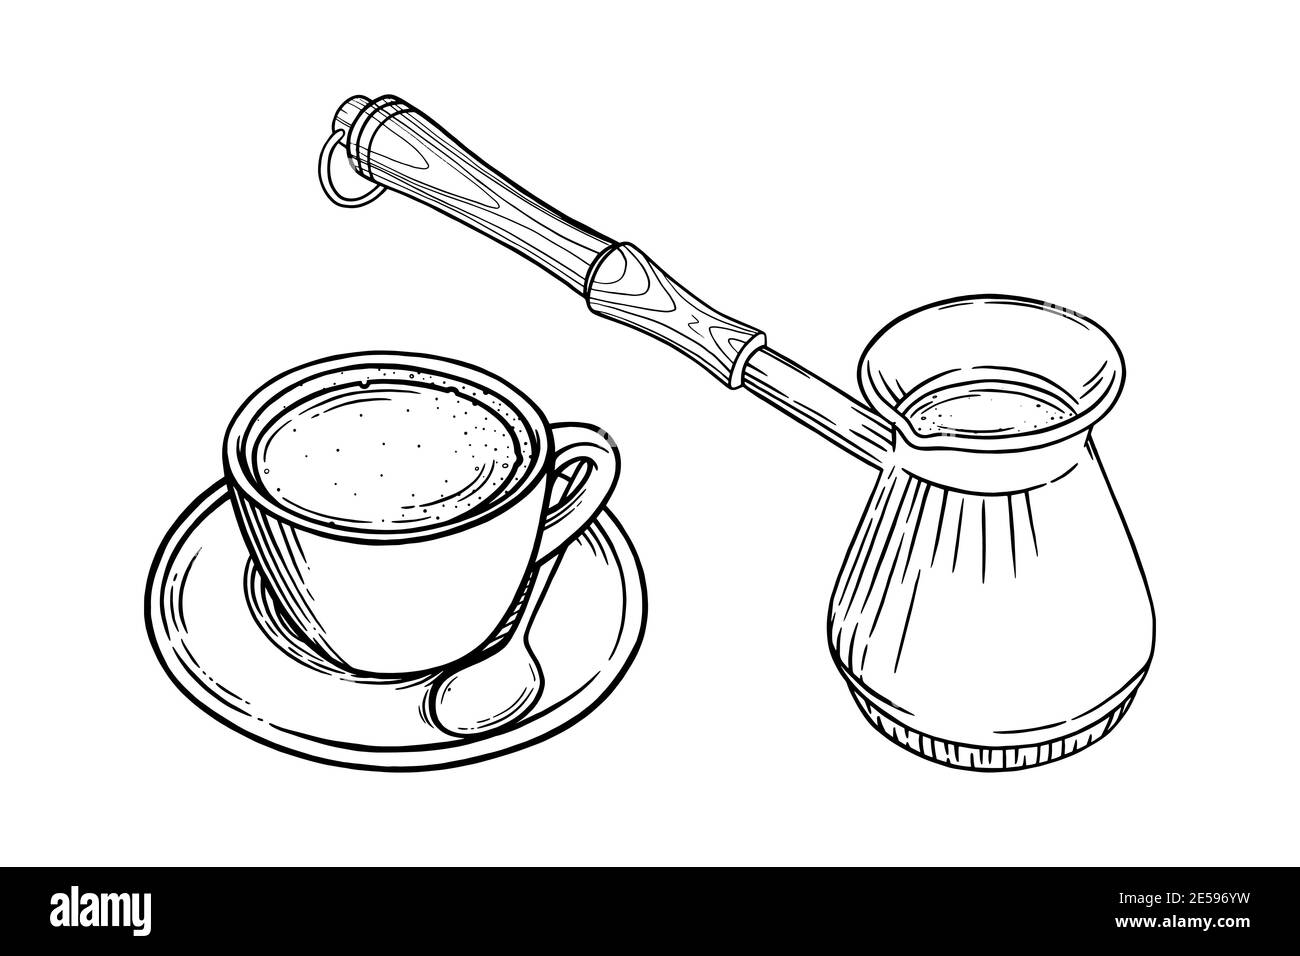 Coffee cup with cappuccino and turkish pot. Engraved sketch set of coffee mug and pot. Black and white vector illustration Stock Vector